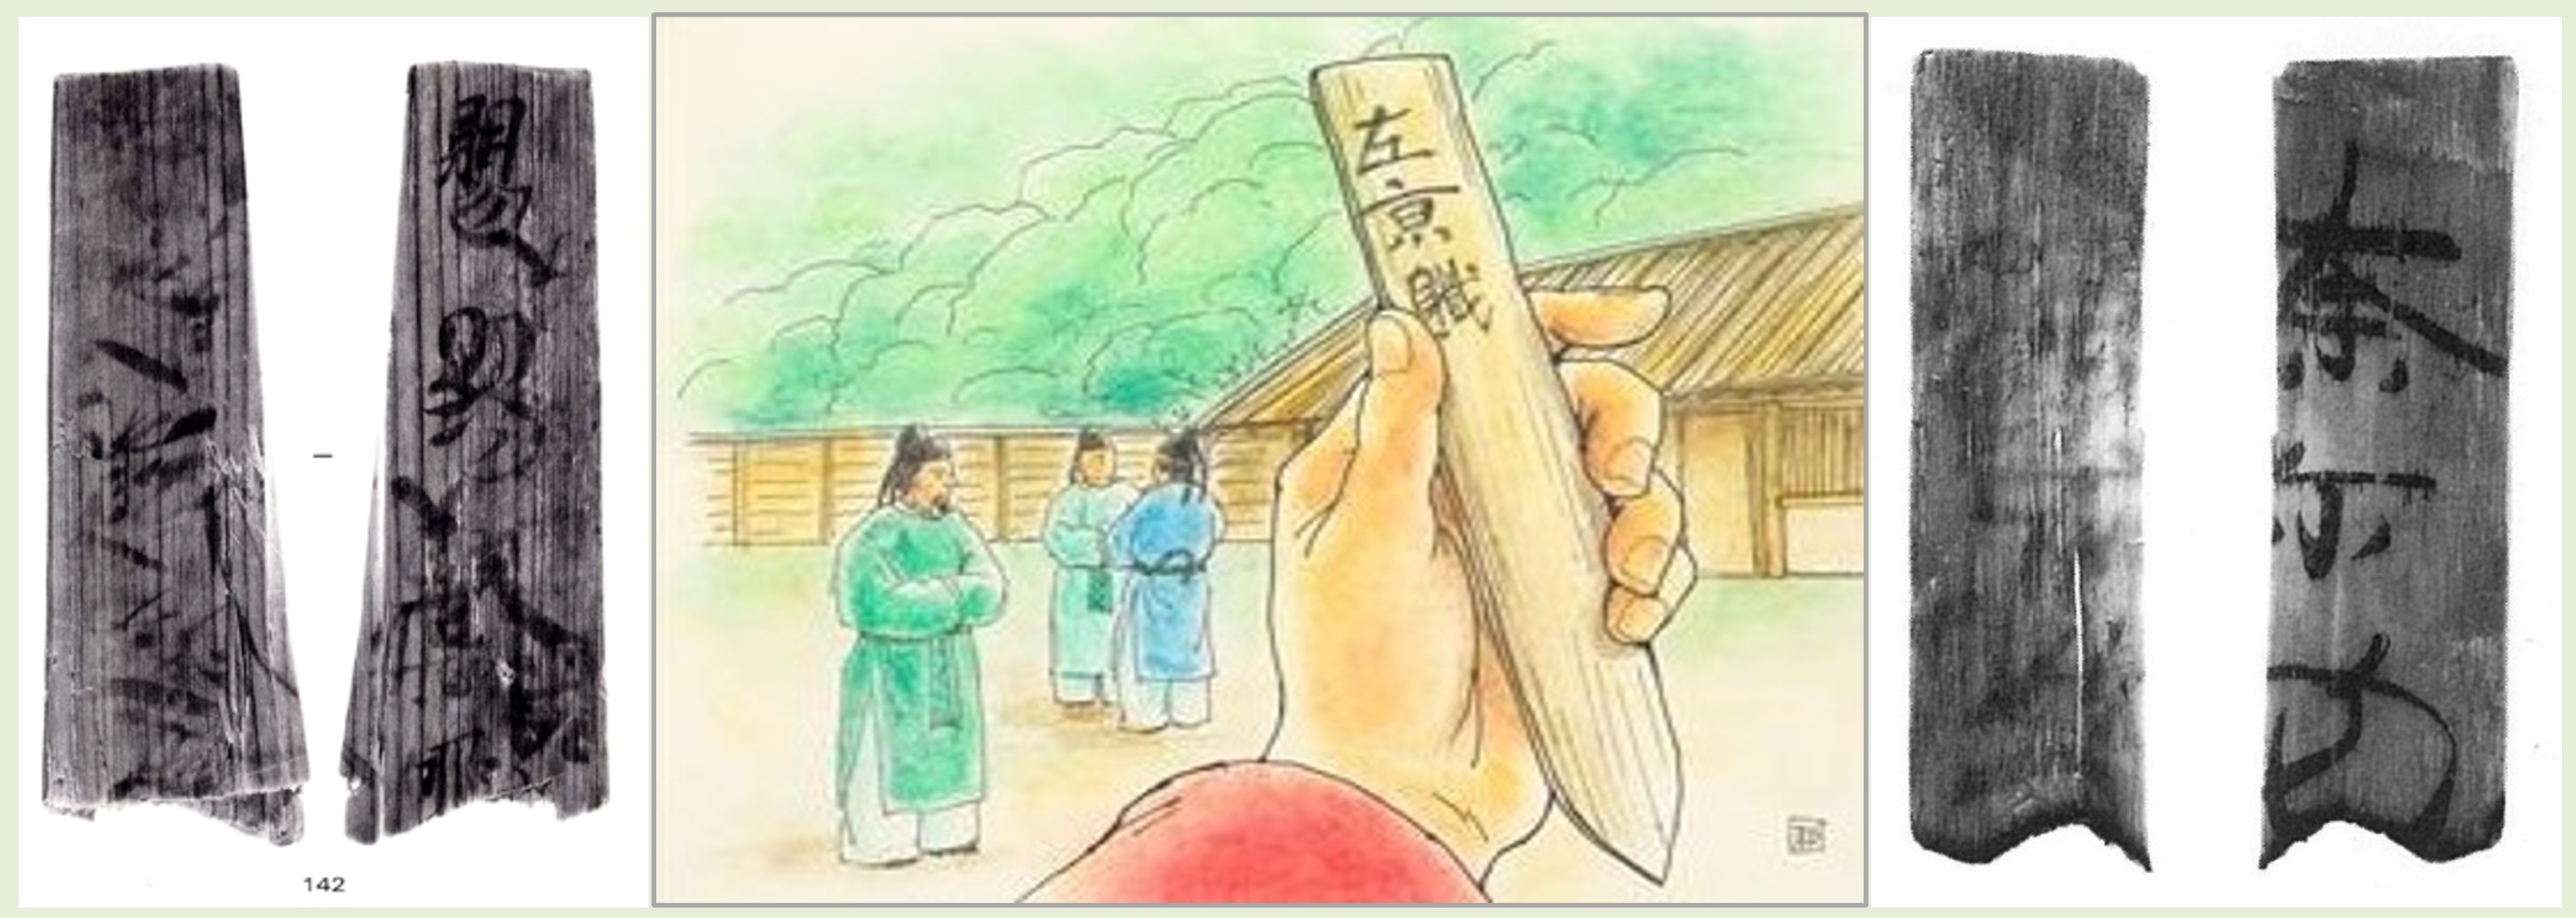 Learning to Read and Write in Early Japan: Perspectives from Mokkan